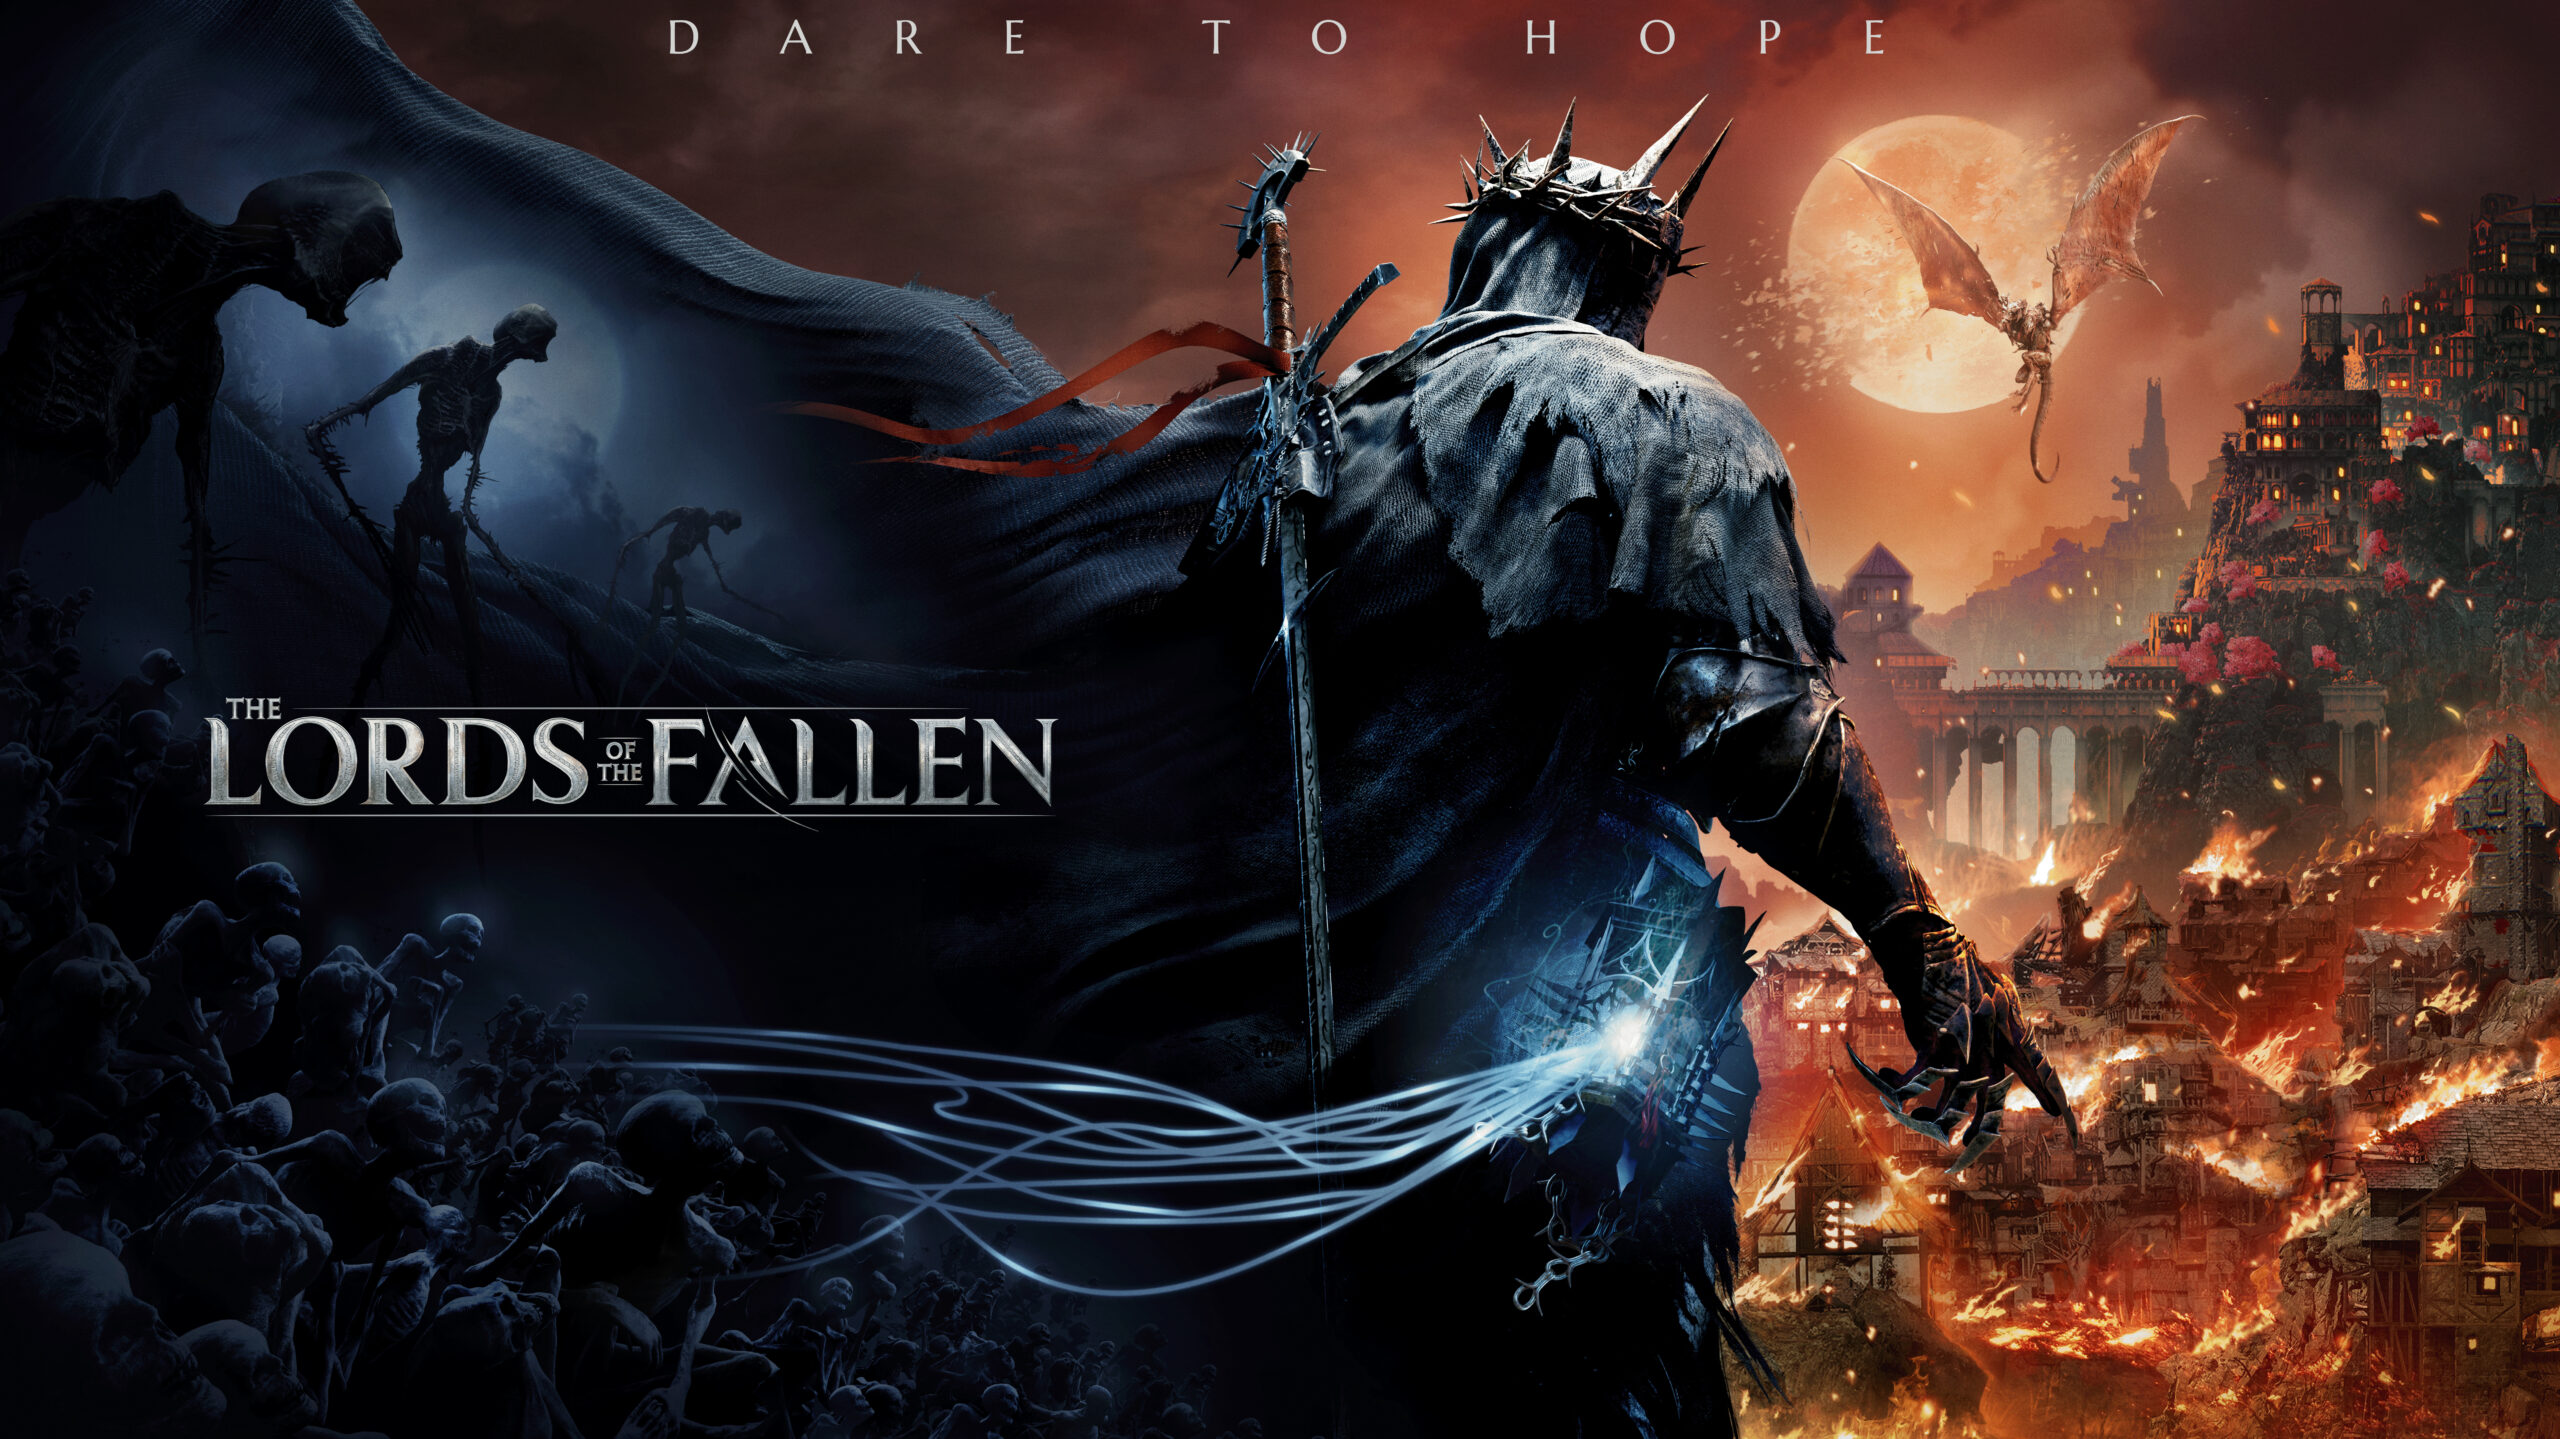 The Lords of the Fallen: Dark Fantasy Action RPG shows itself again